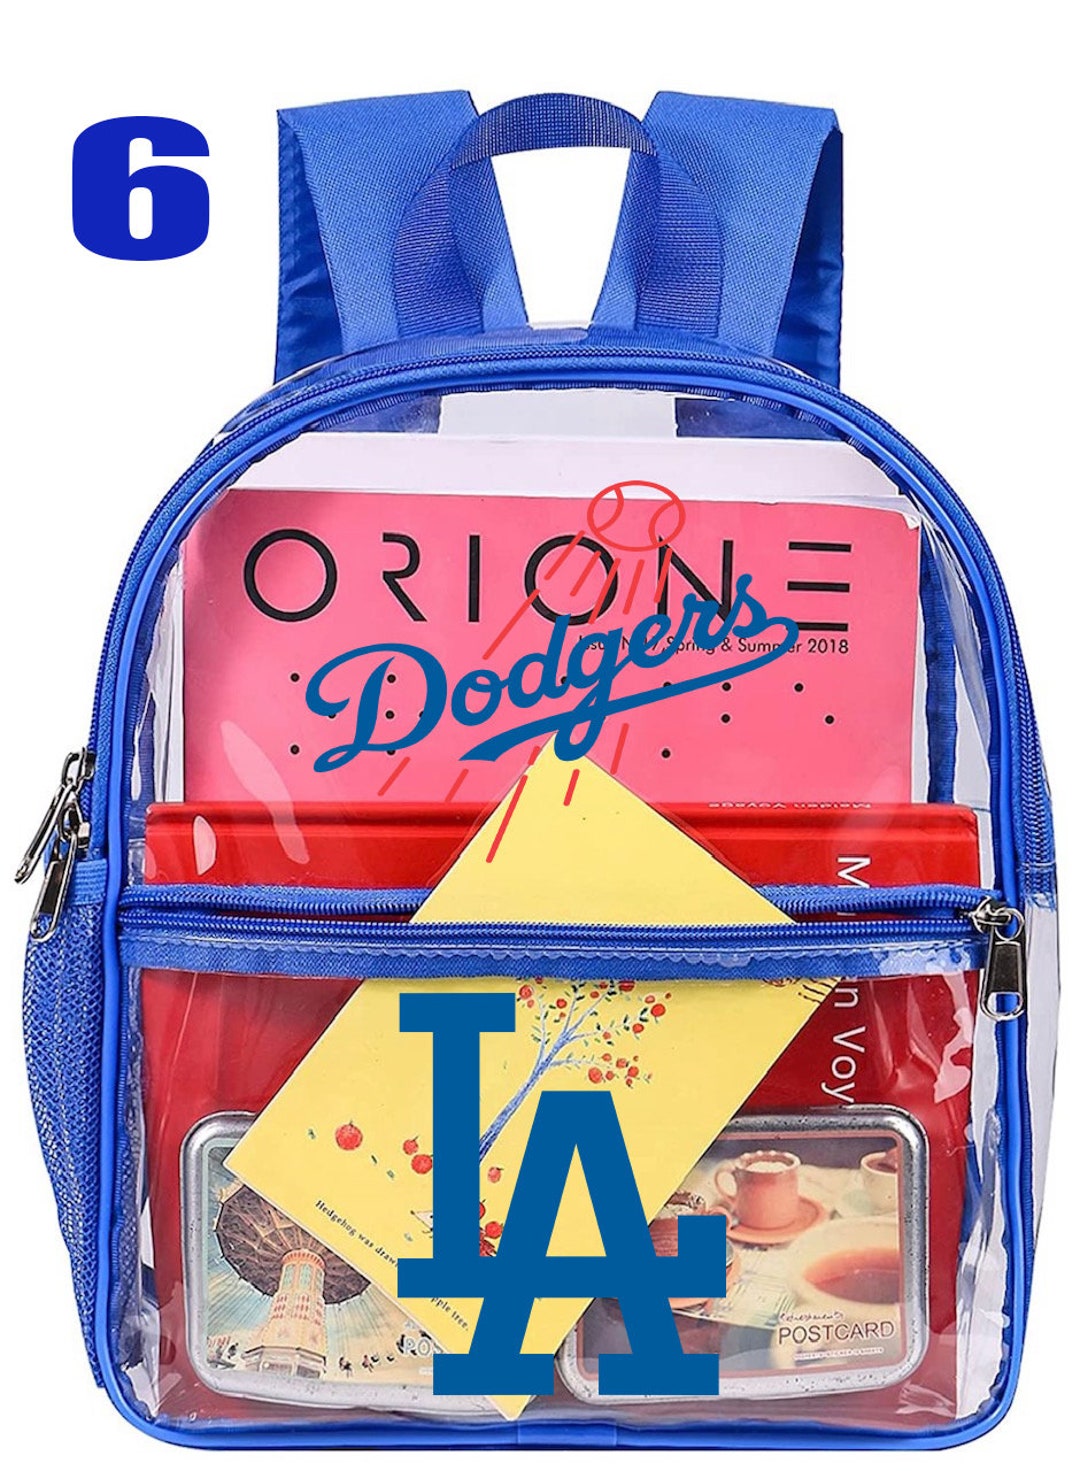 Los Angeles Dodgers Clear Stadium Bag for Sale in Chula Vista, CA - OfferUp